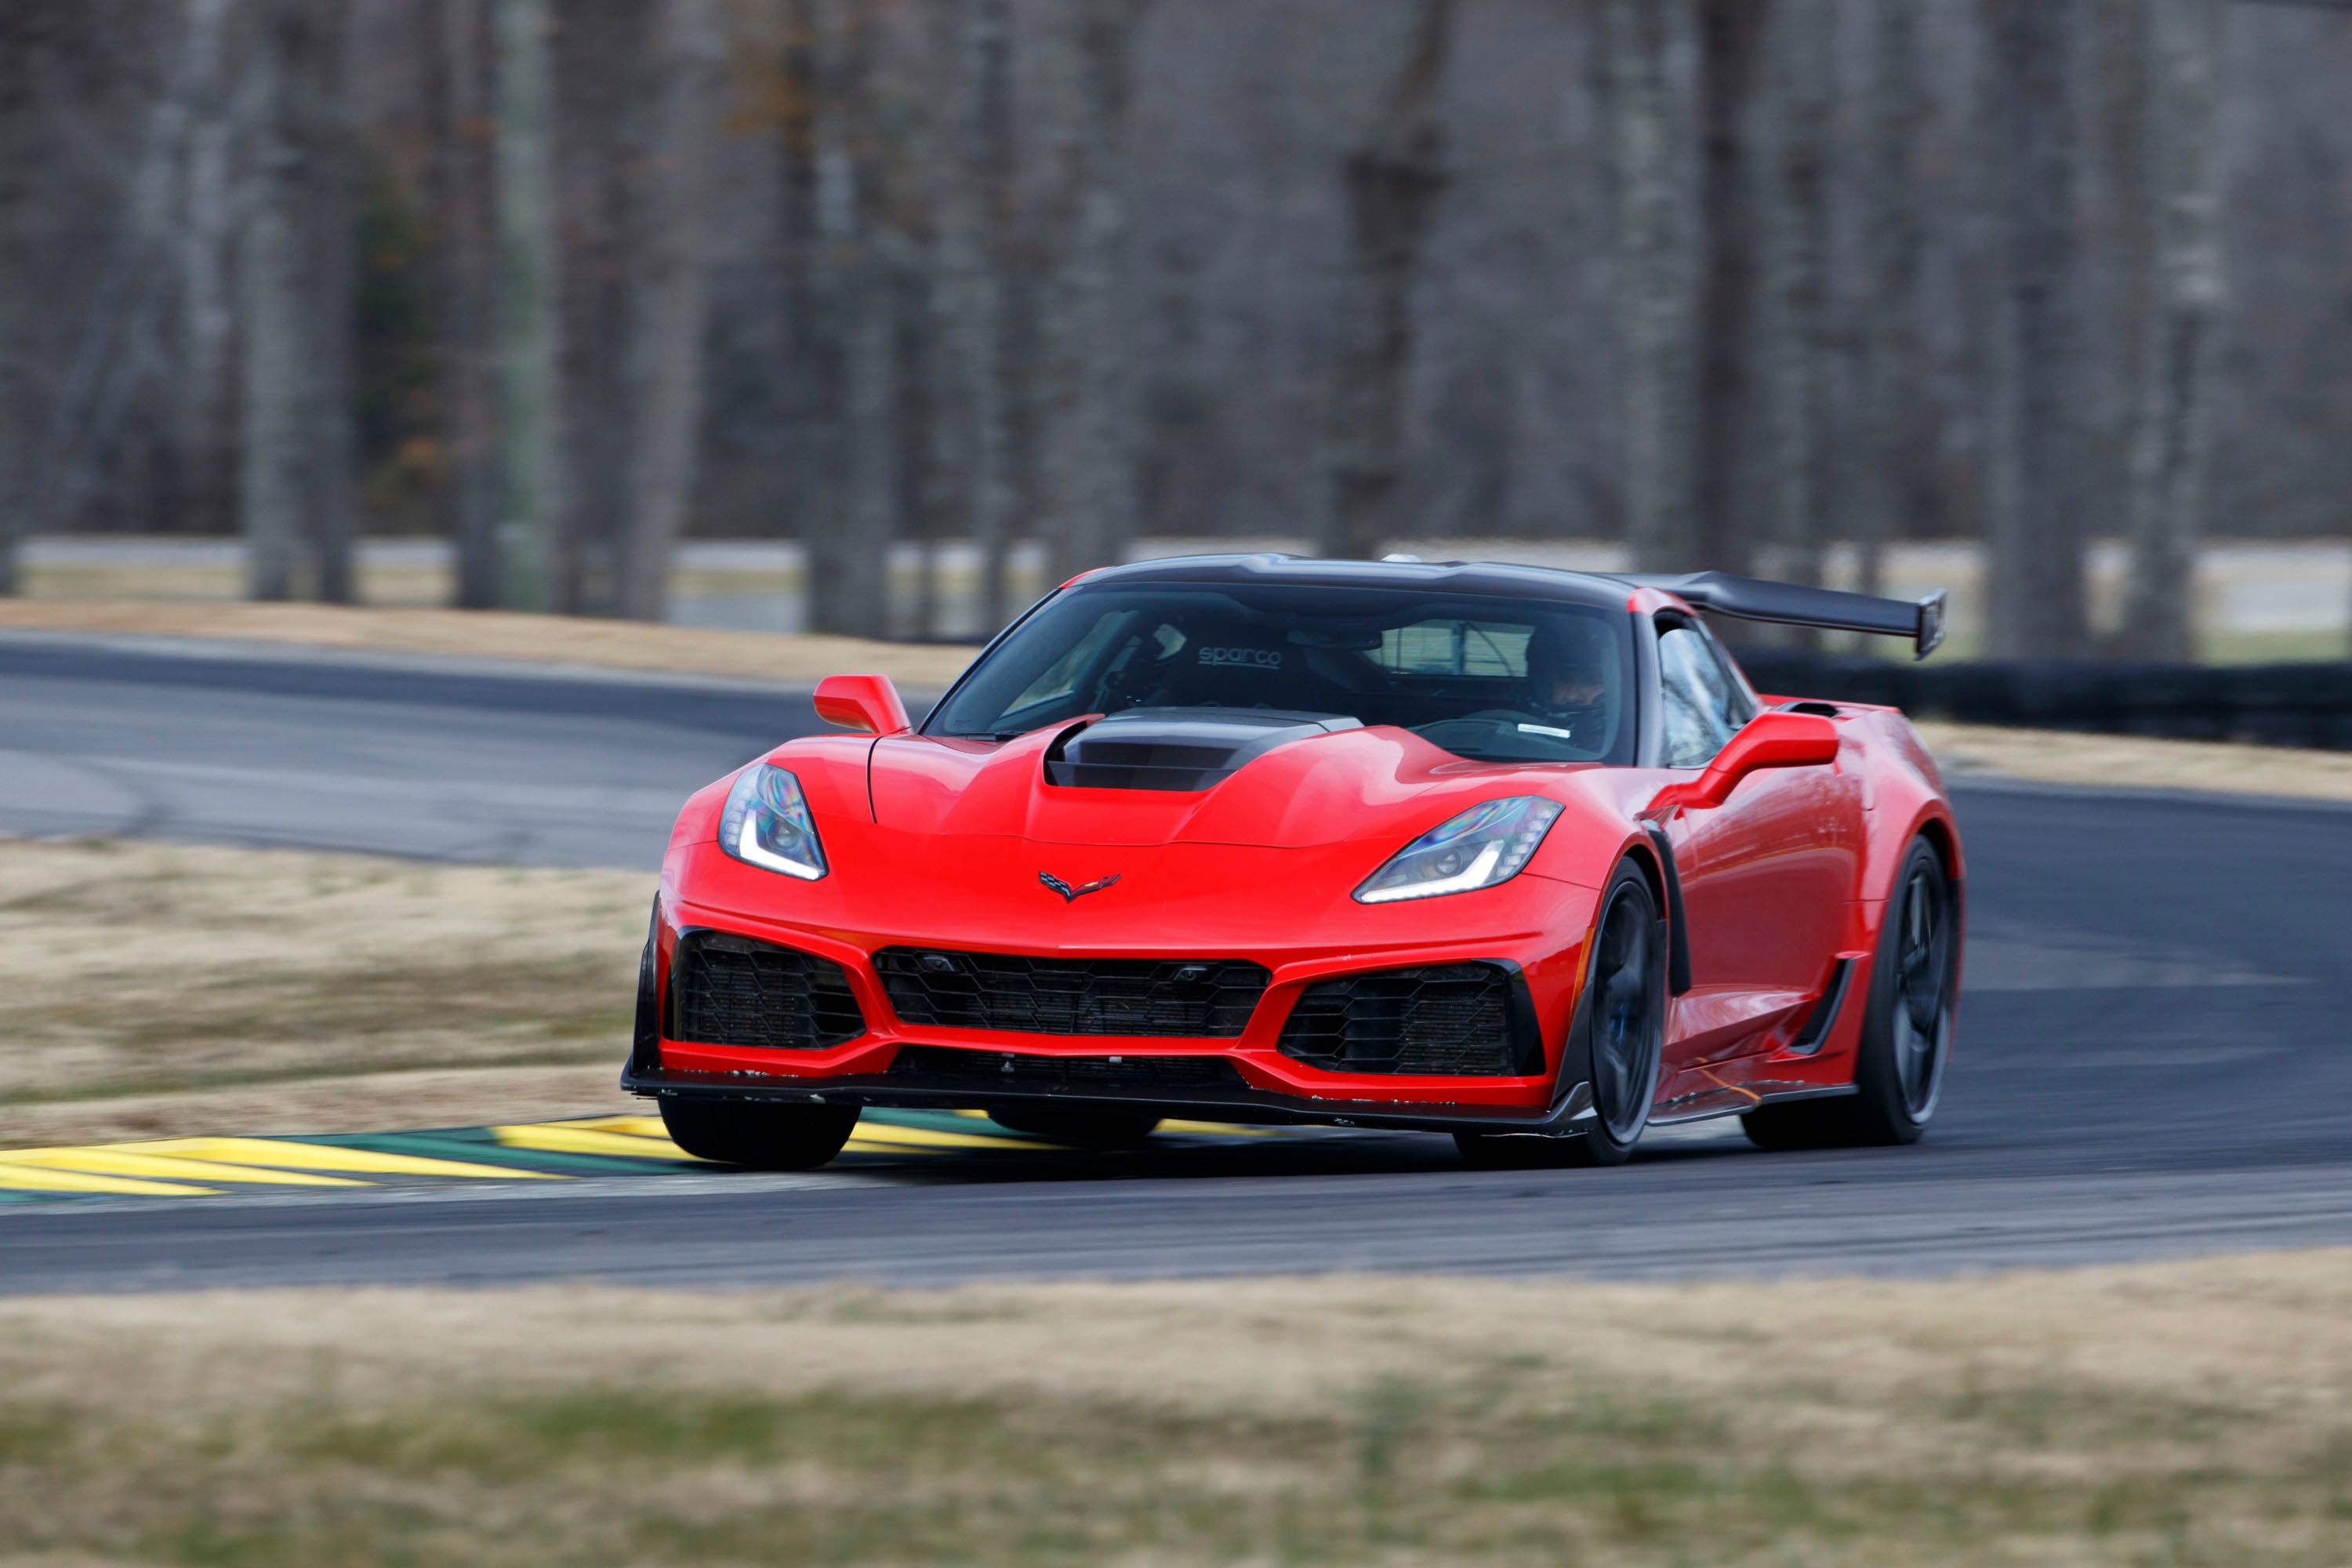 2018 Video: New Corvette ZR1 Proves Its Worth With New Lap Record At VIR